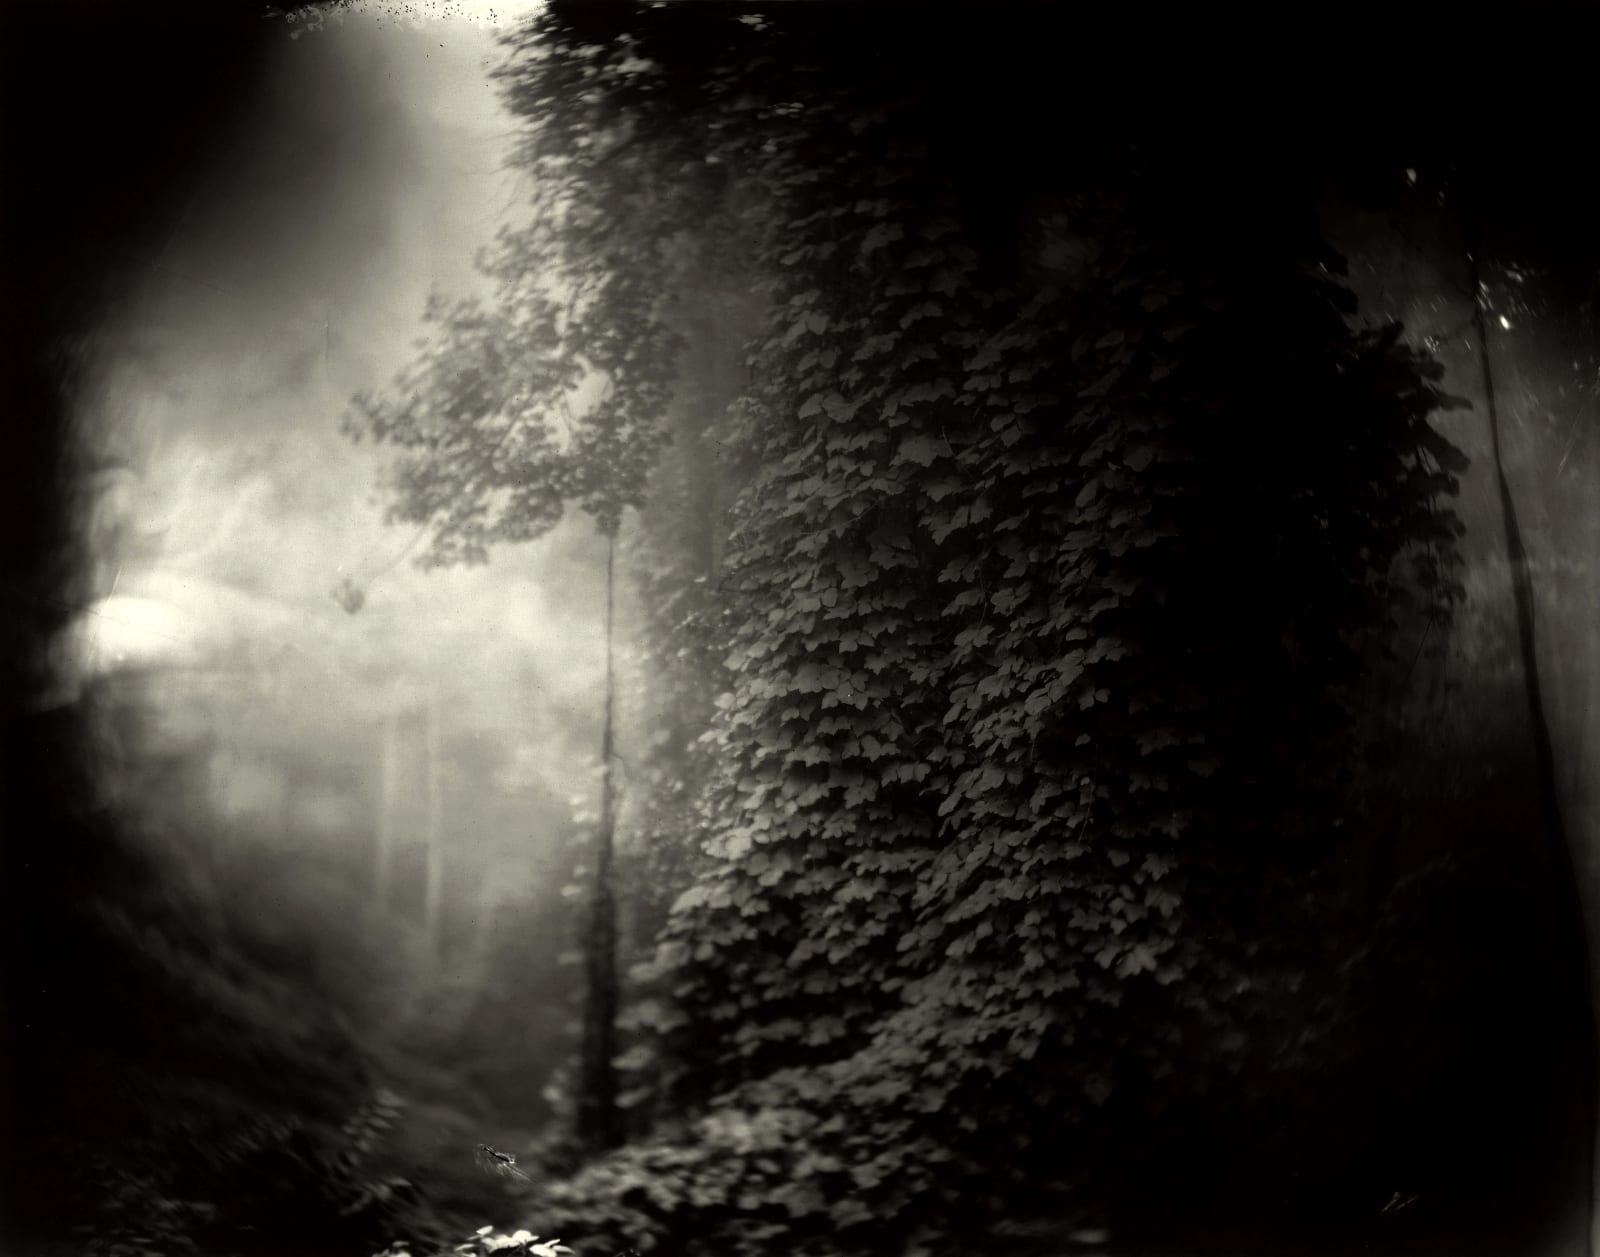 Georgia landscape with tree covered in kudzu climbing vine, from the Mother Land series by Sally Mann